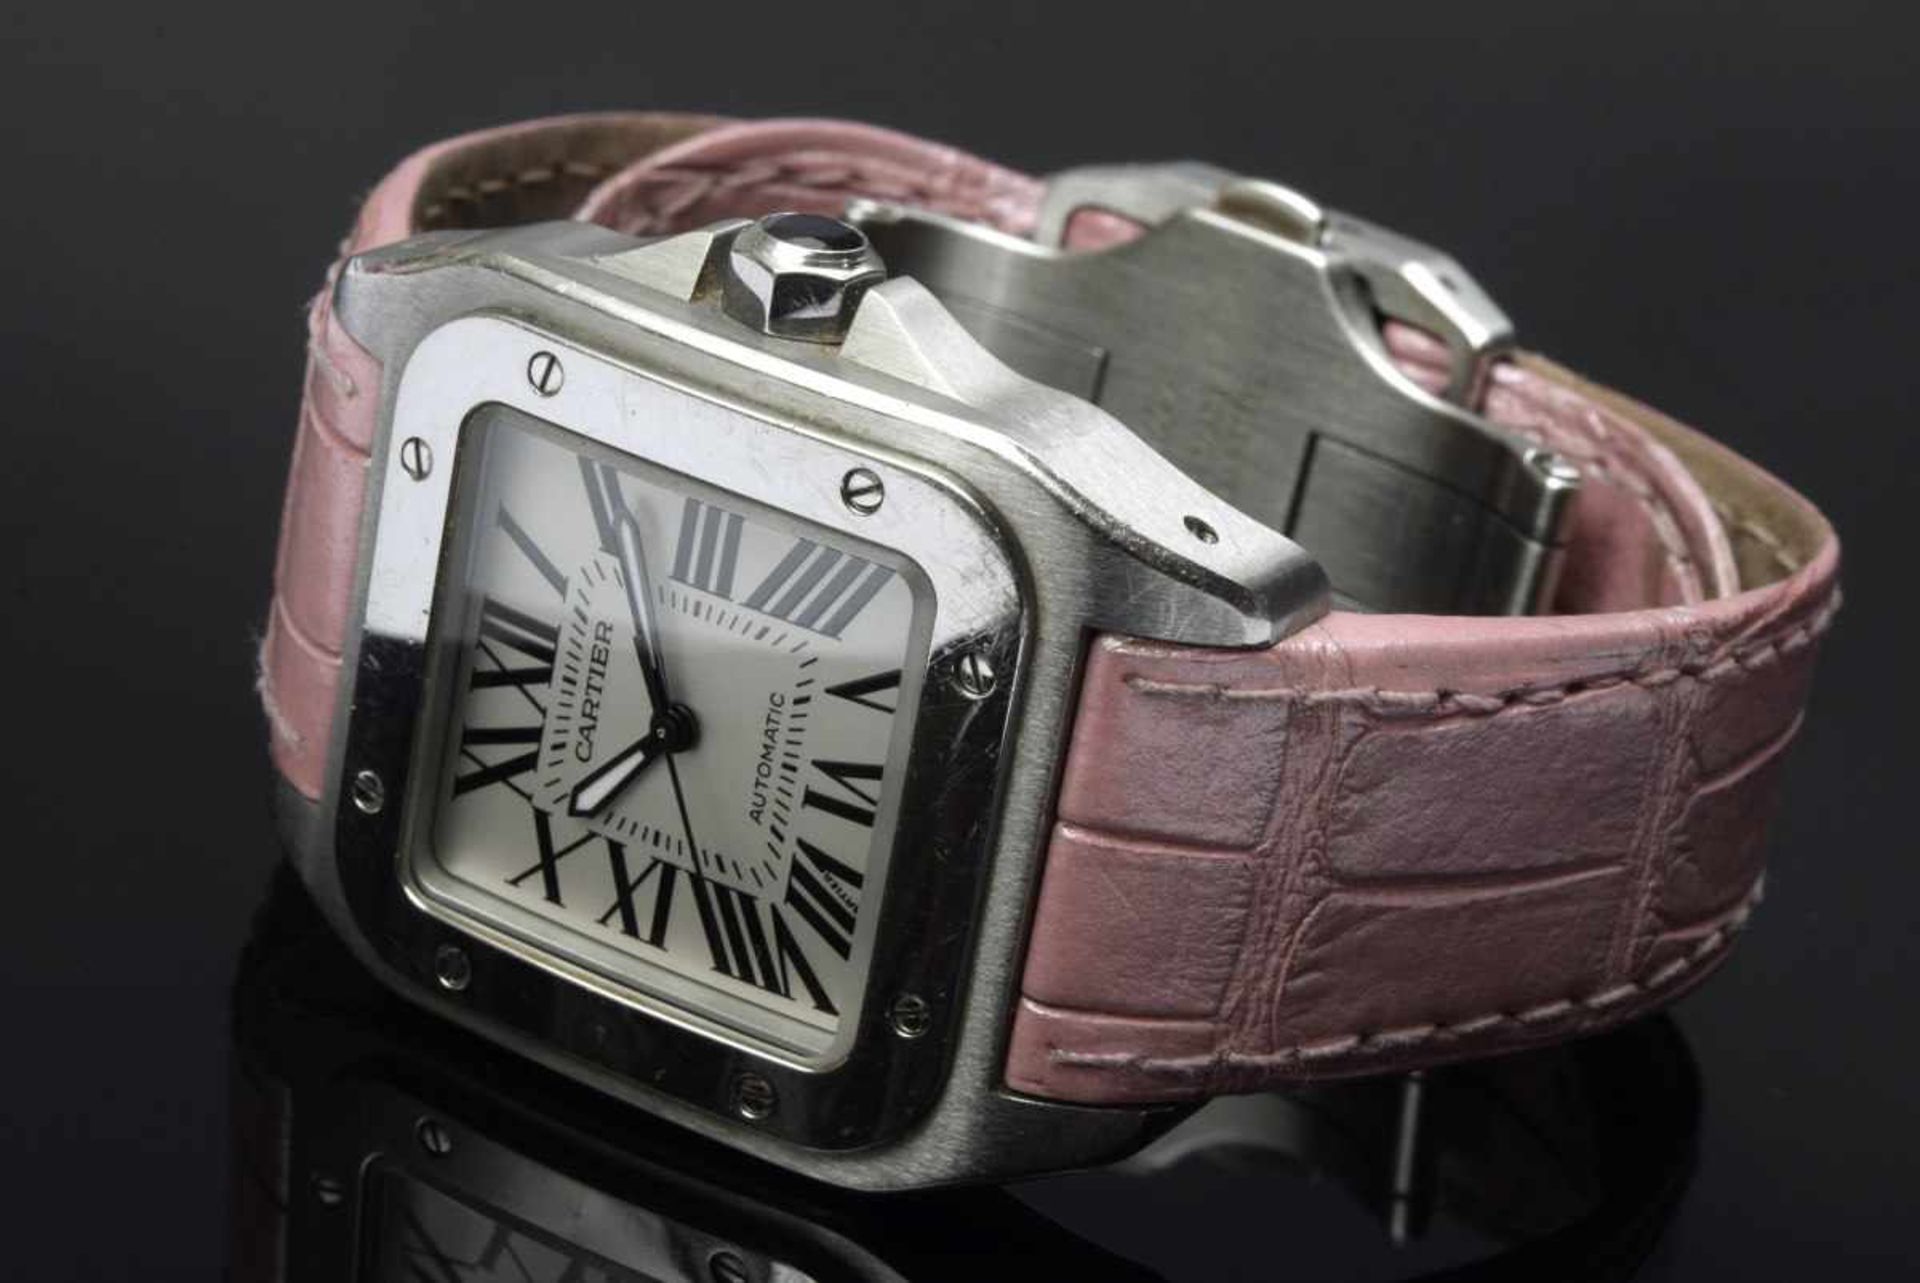 Cartier "Santos 100" watch, stainless steel, automatic movement, silver-coloured dial with Roman - Image 2 of 7